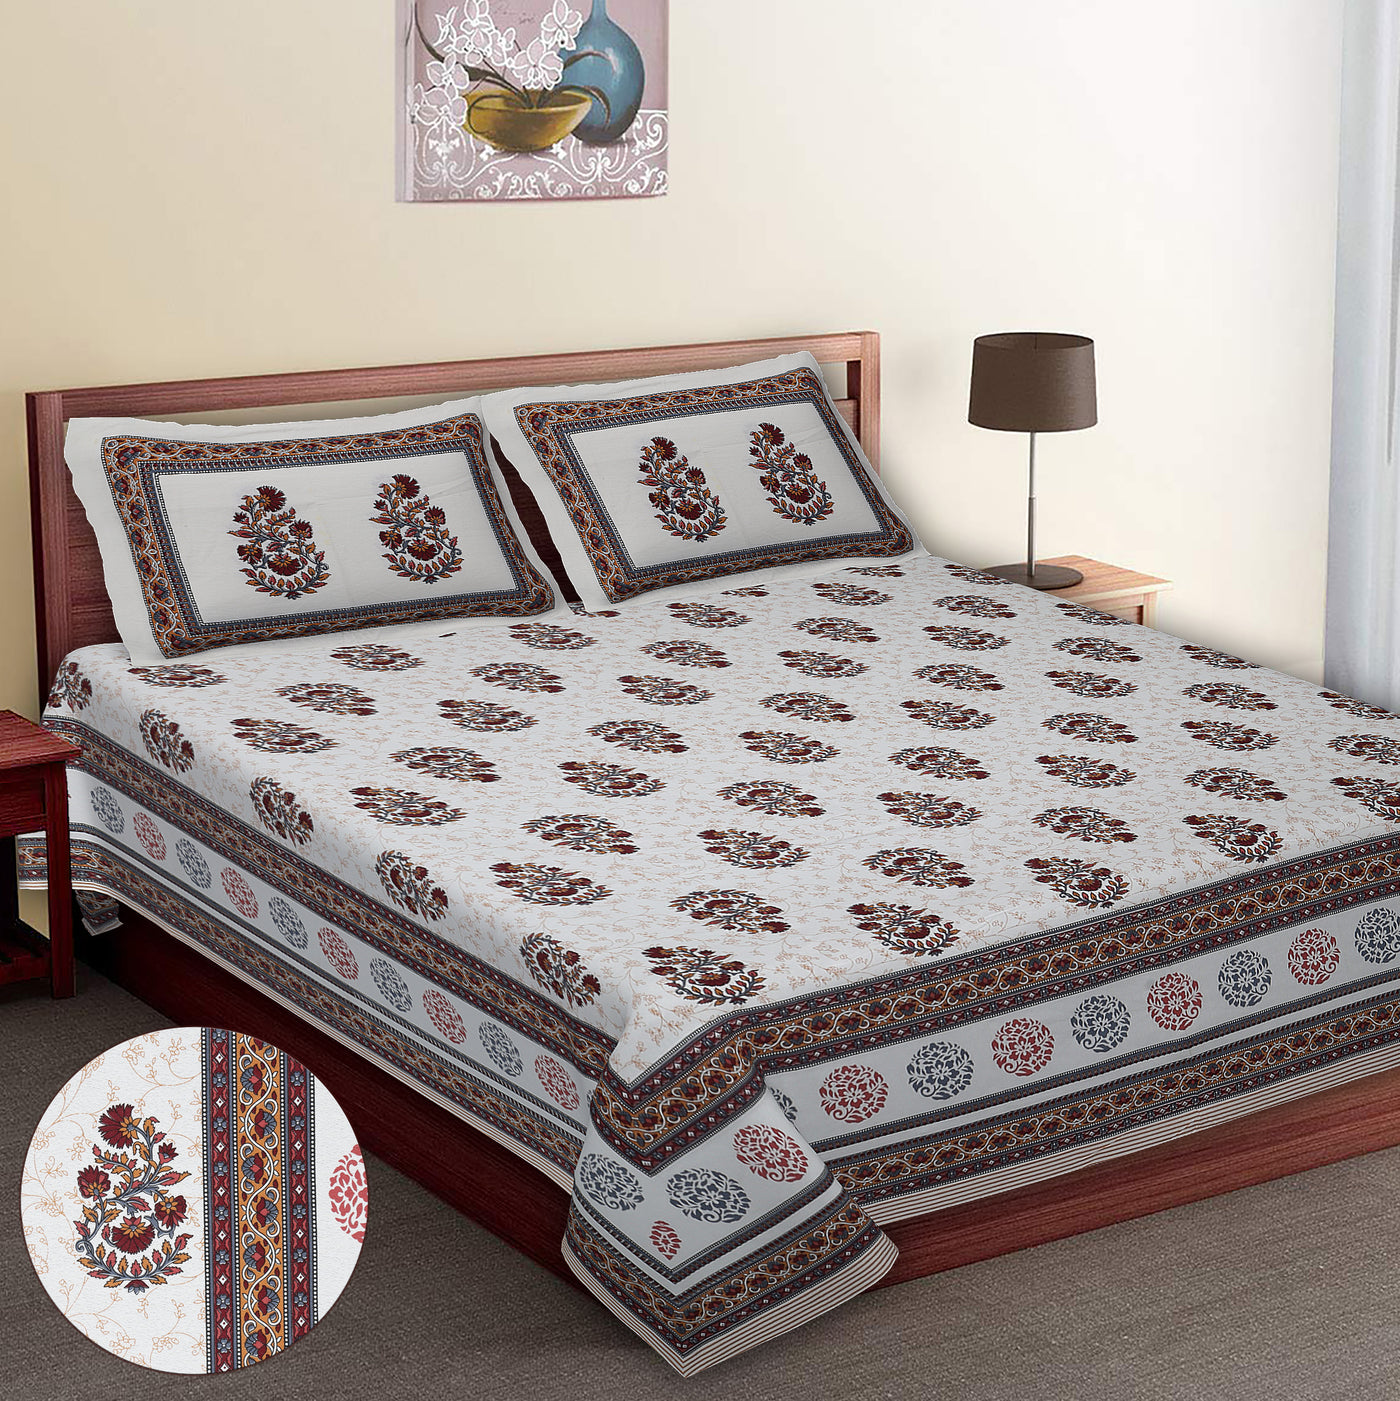 Wanderlust Premium | Super King Size 108 x 108 in | 100% Pure Cotton | Double Bedsheet with 2 Pillow Covers SG02